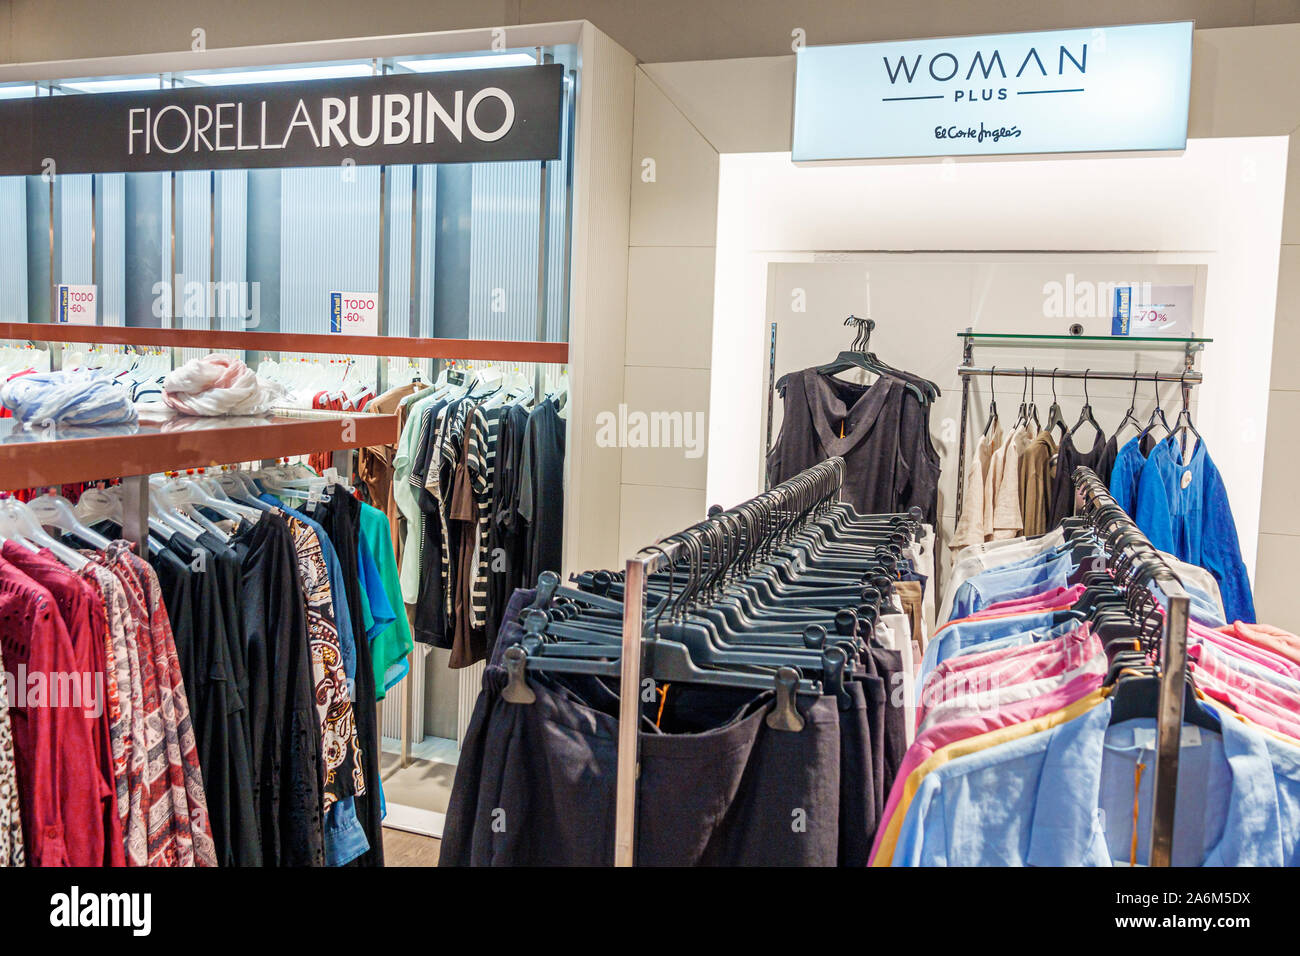 Fiorella Rubino High Resolution Stock Photography and Images - Alamy